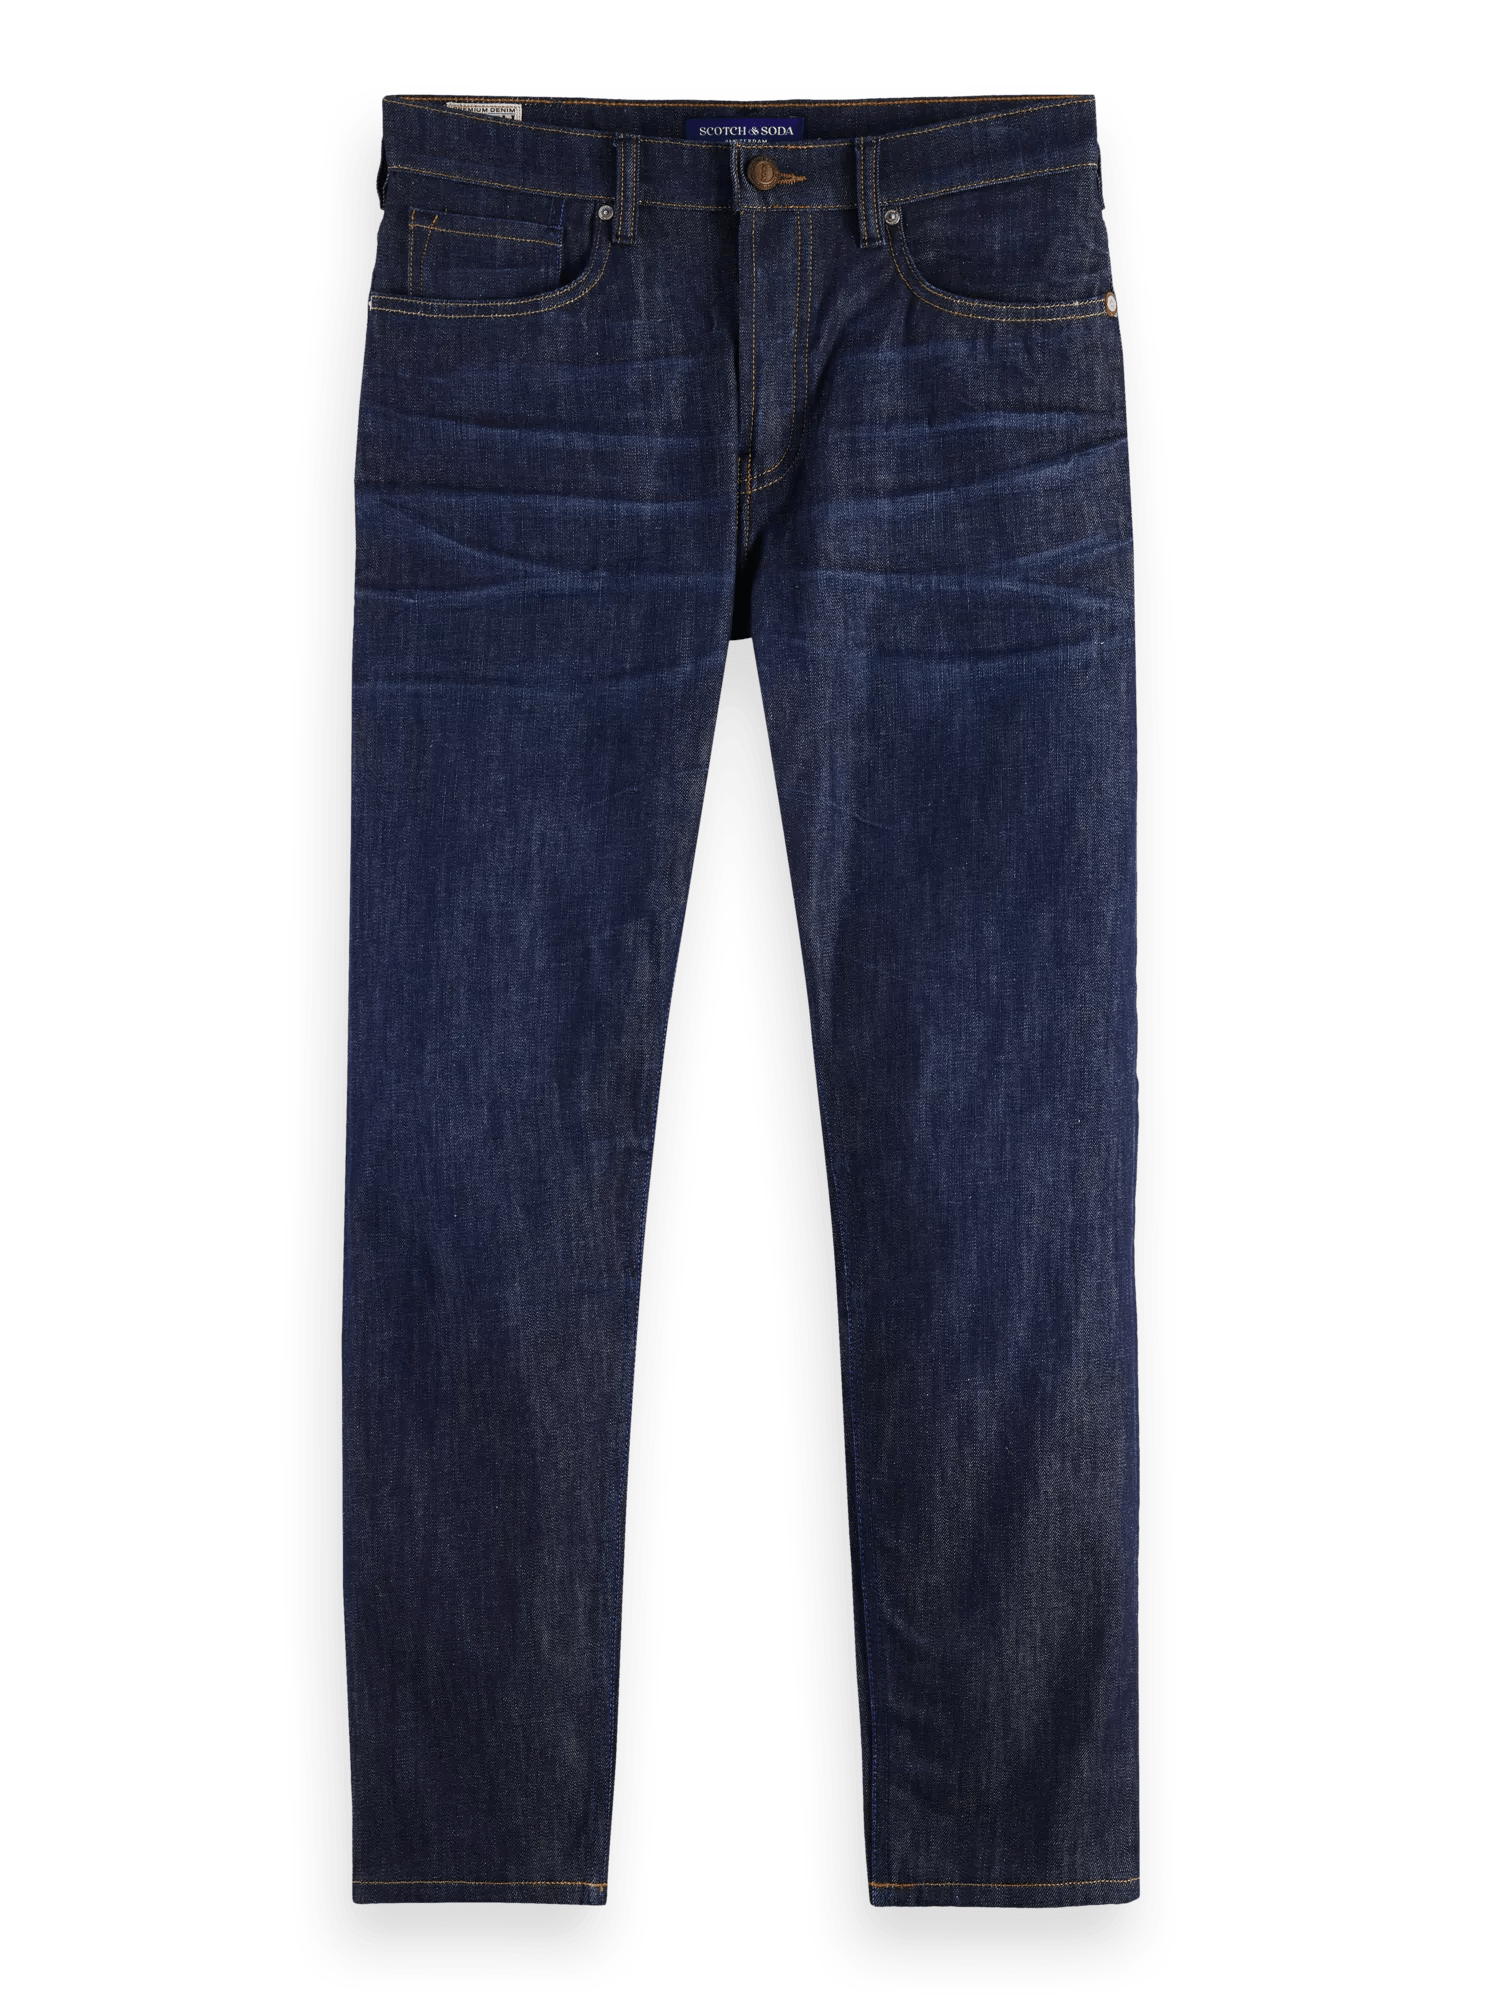 Scotch & Soda The Drop Regular Tapered Fit Jeans FNT